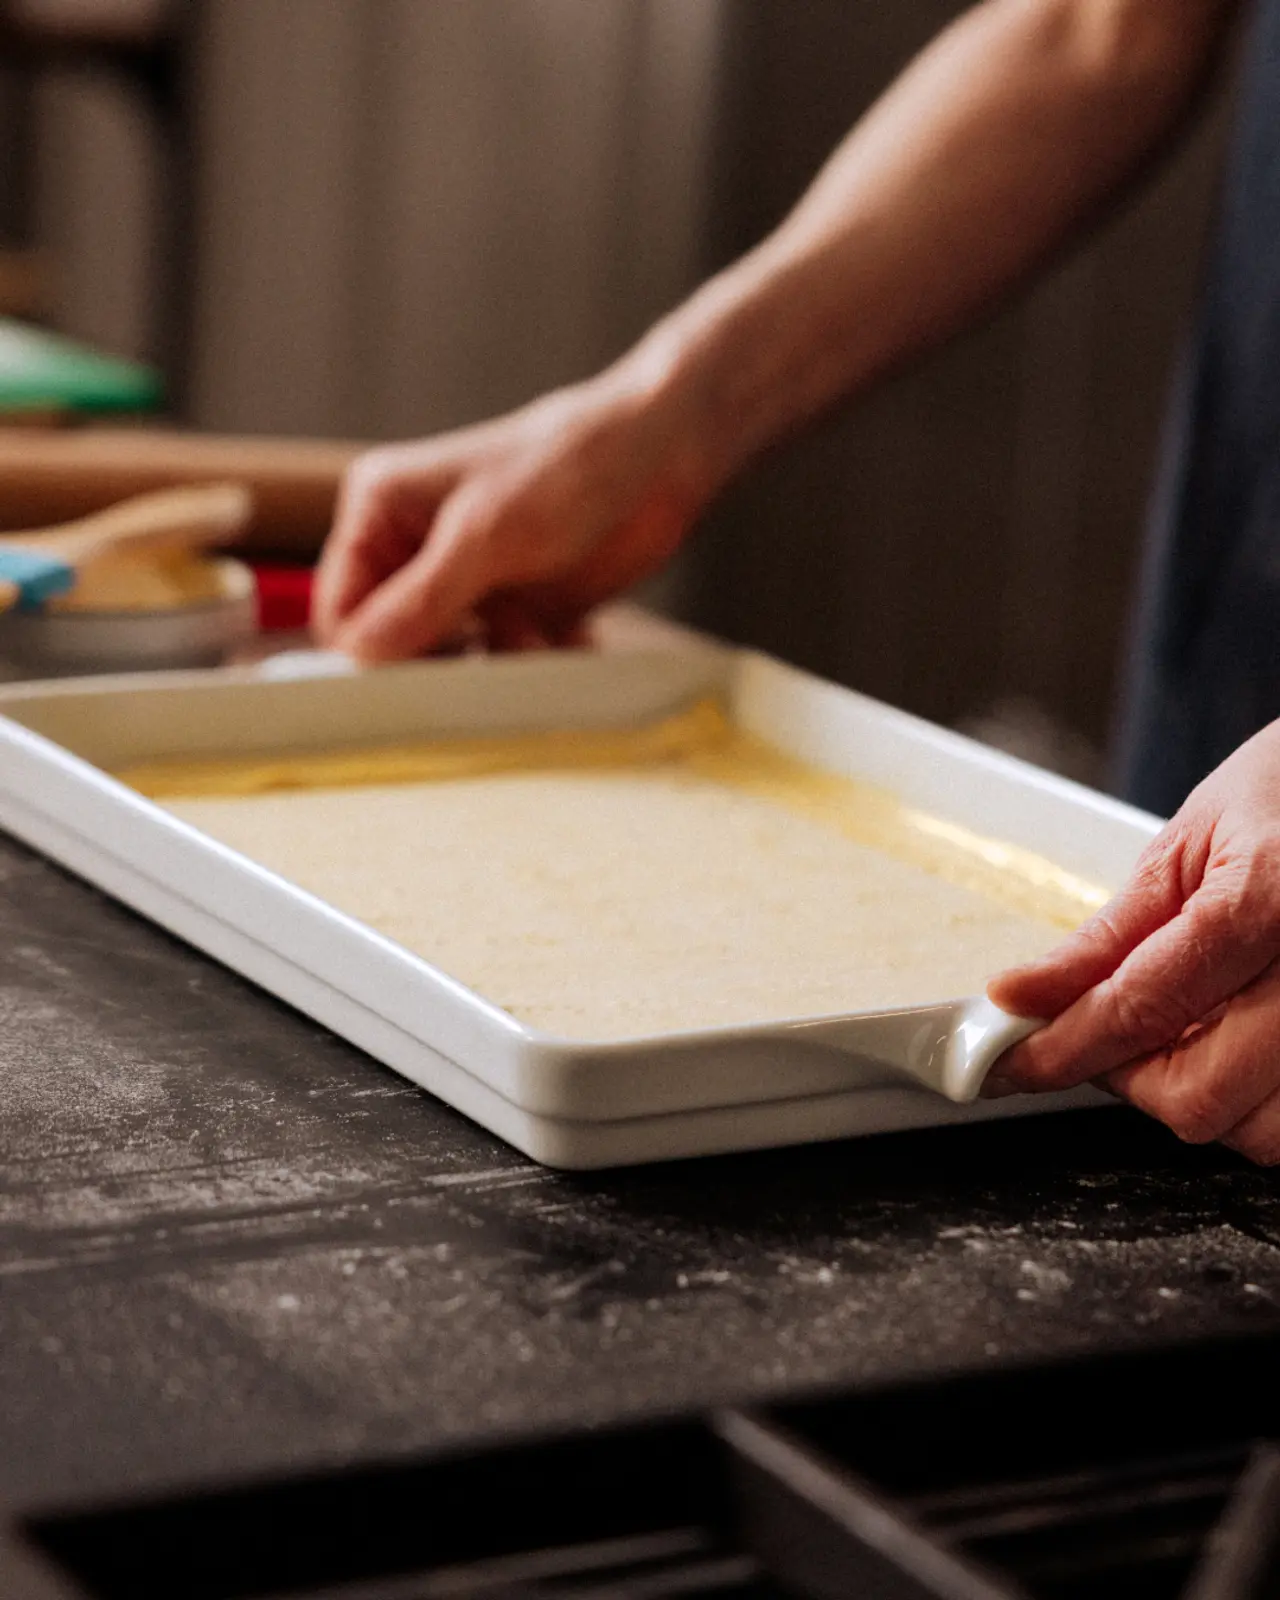 A person is smoothing batter in a white baking tray on a dark kitchen counter.